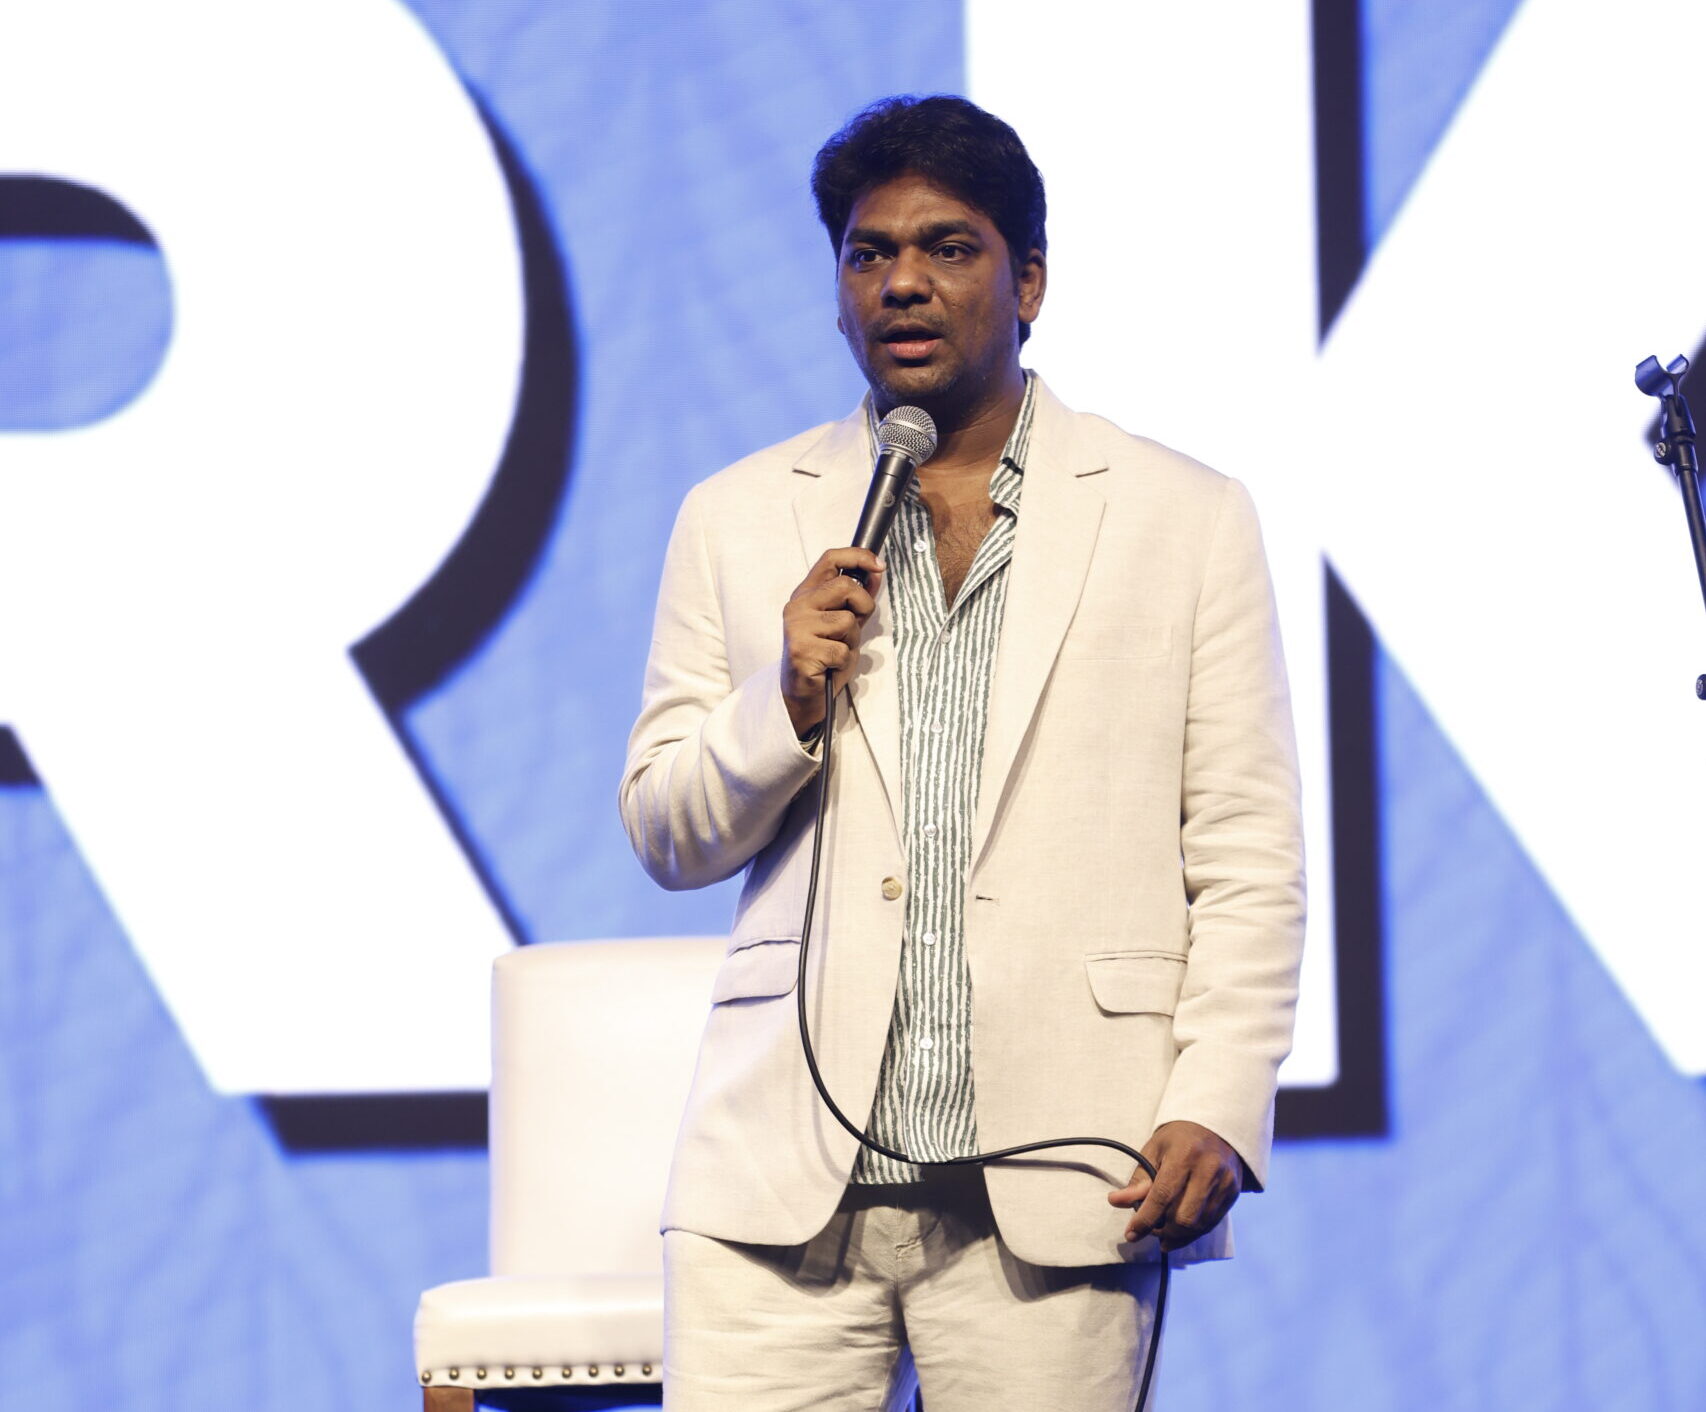 Zakir Khan performing at an awards and gala night event for a corporate event in Pune